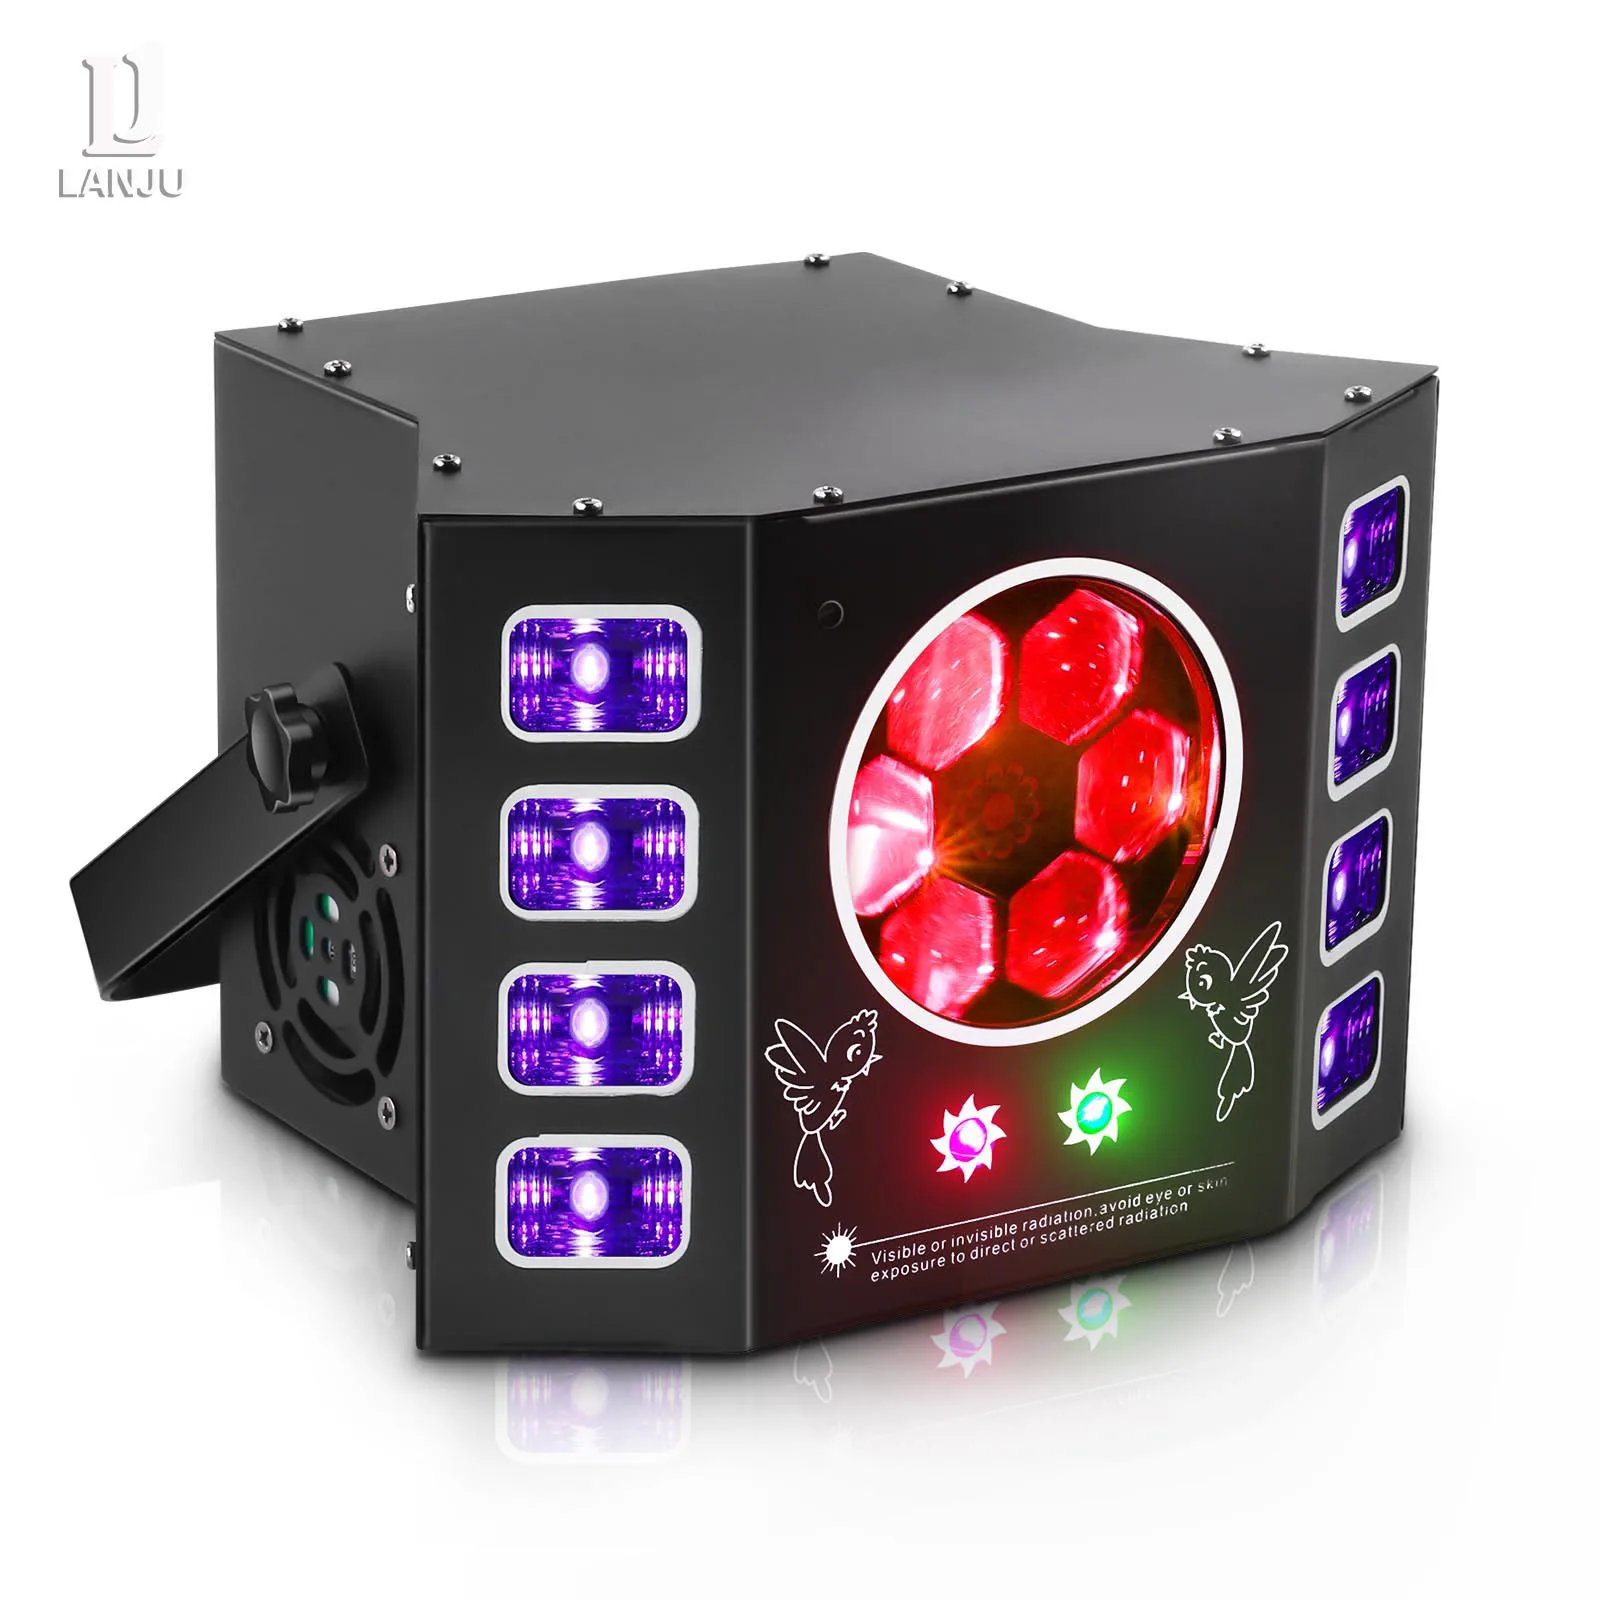 

Disco DJ 4IN1 Laser Light LED UV Beam RGB Pattern Projection DMX Control Strobe Lamps Home Party KTV Club Stage Effect Lighting